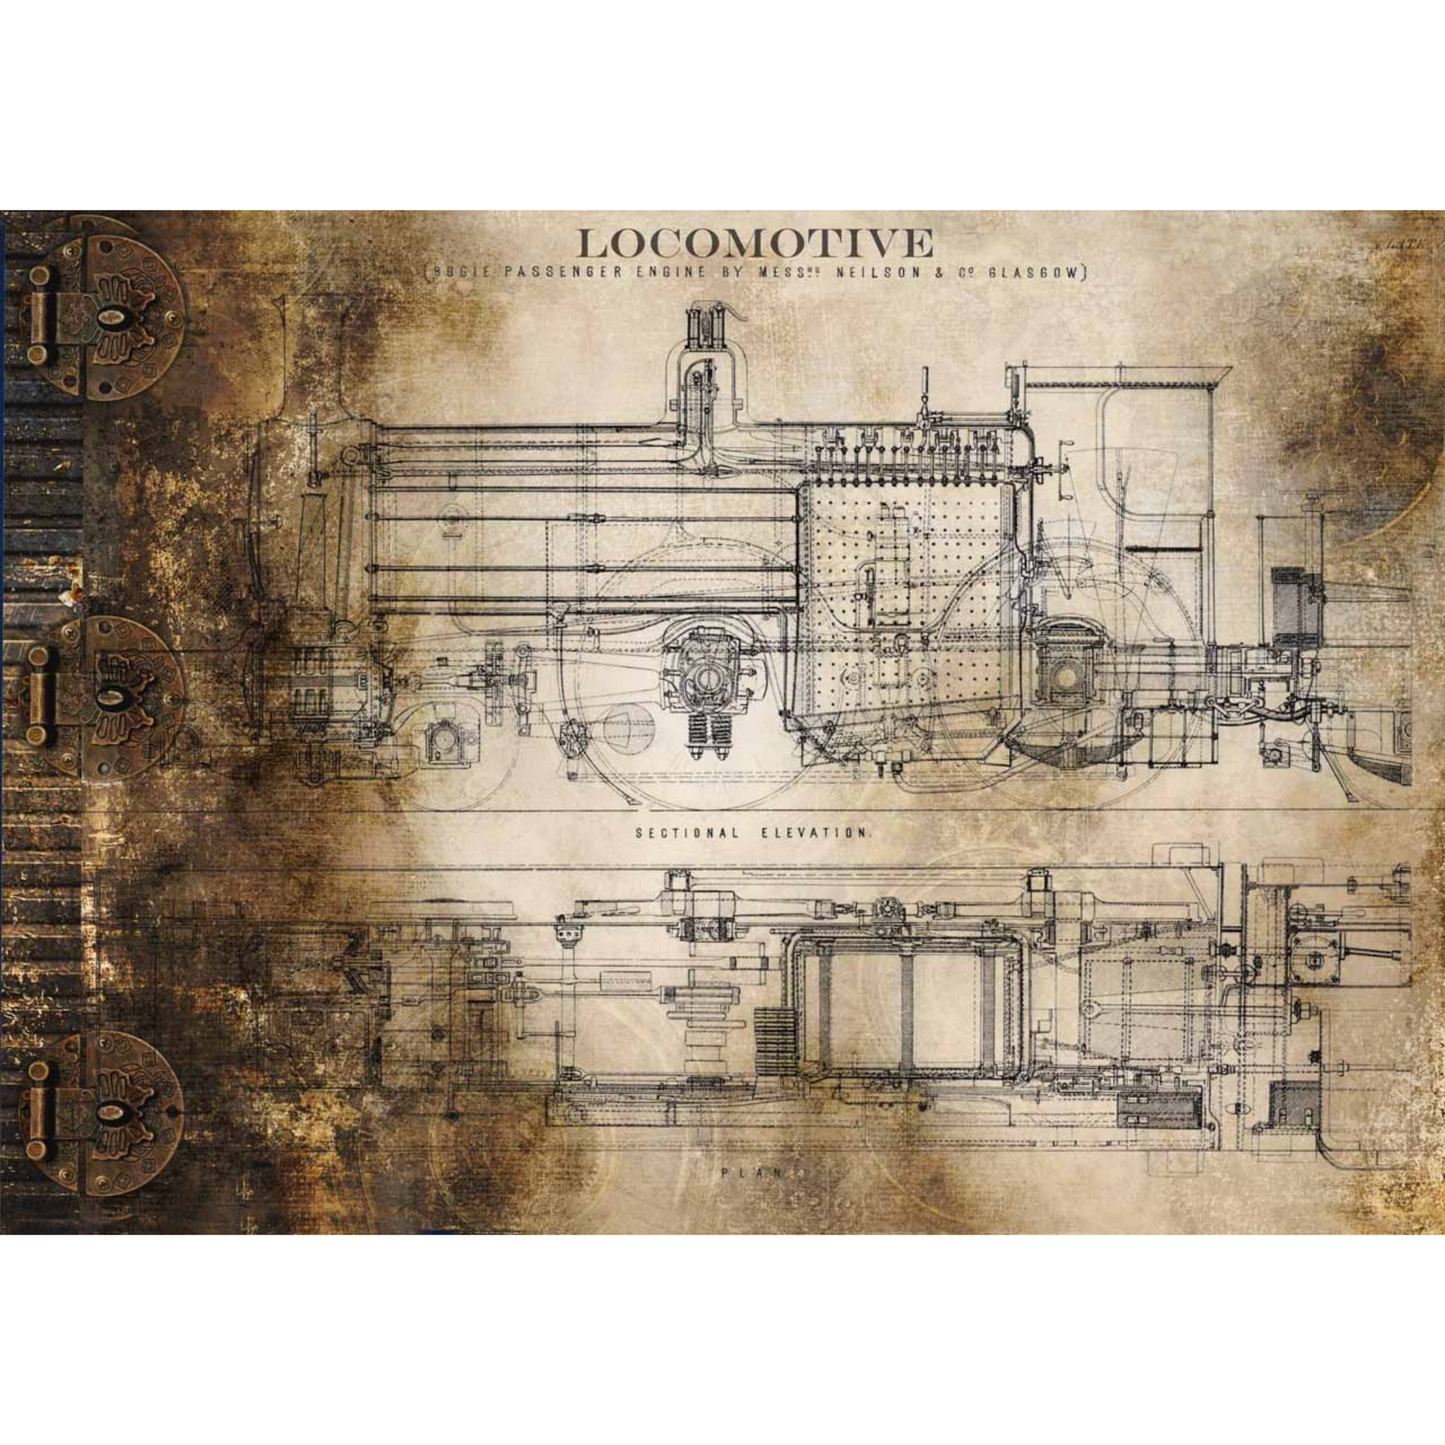 "Locomotive" Decoupage Rice Paper by Decoupage Queen. Size A3- 11.7" x 16.5" available at Milton's Daughter.